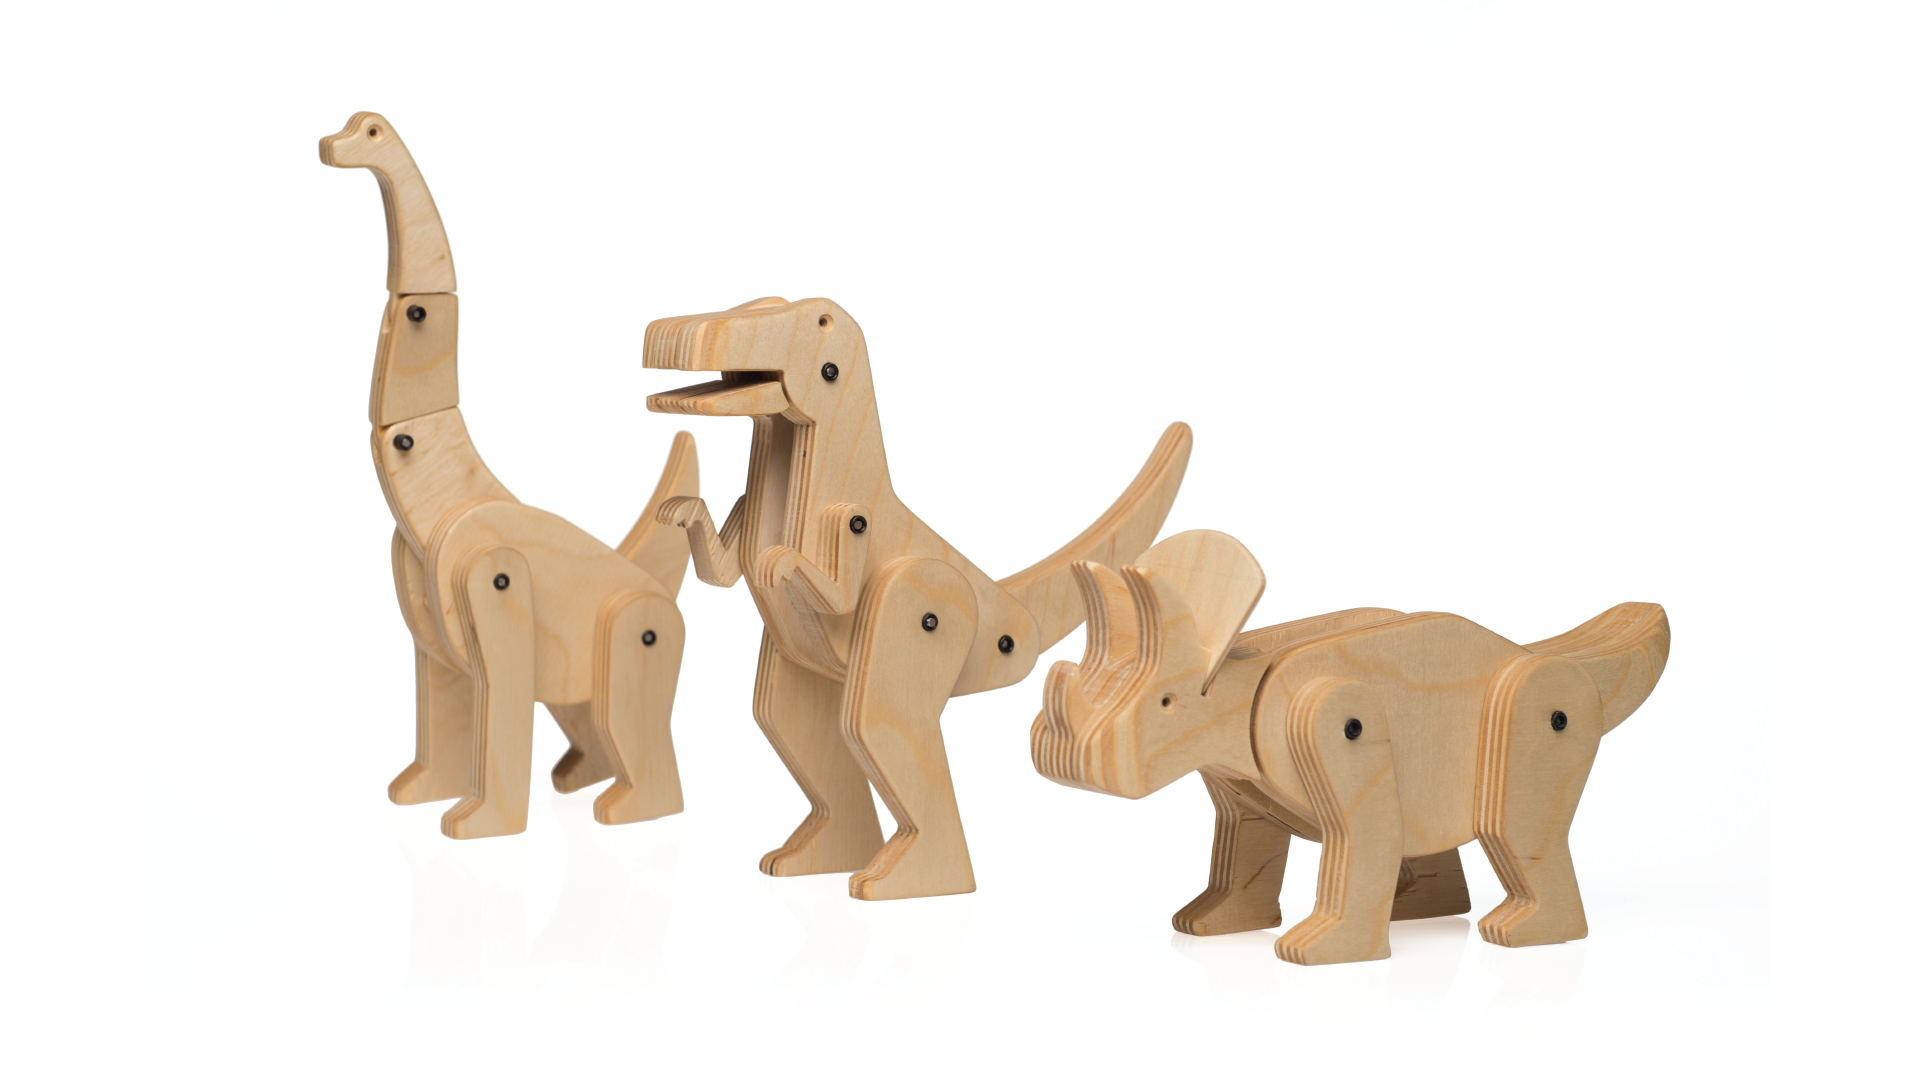 3 wooden toys representing 3 different types of dinosaurs.